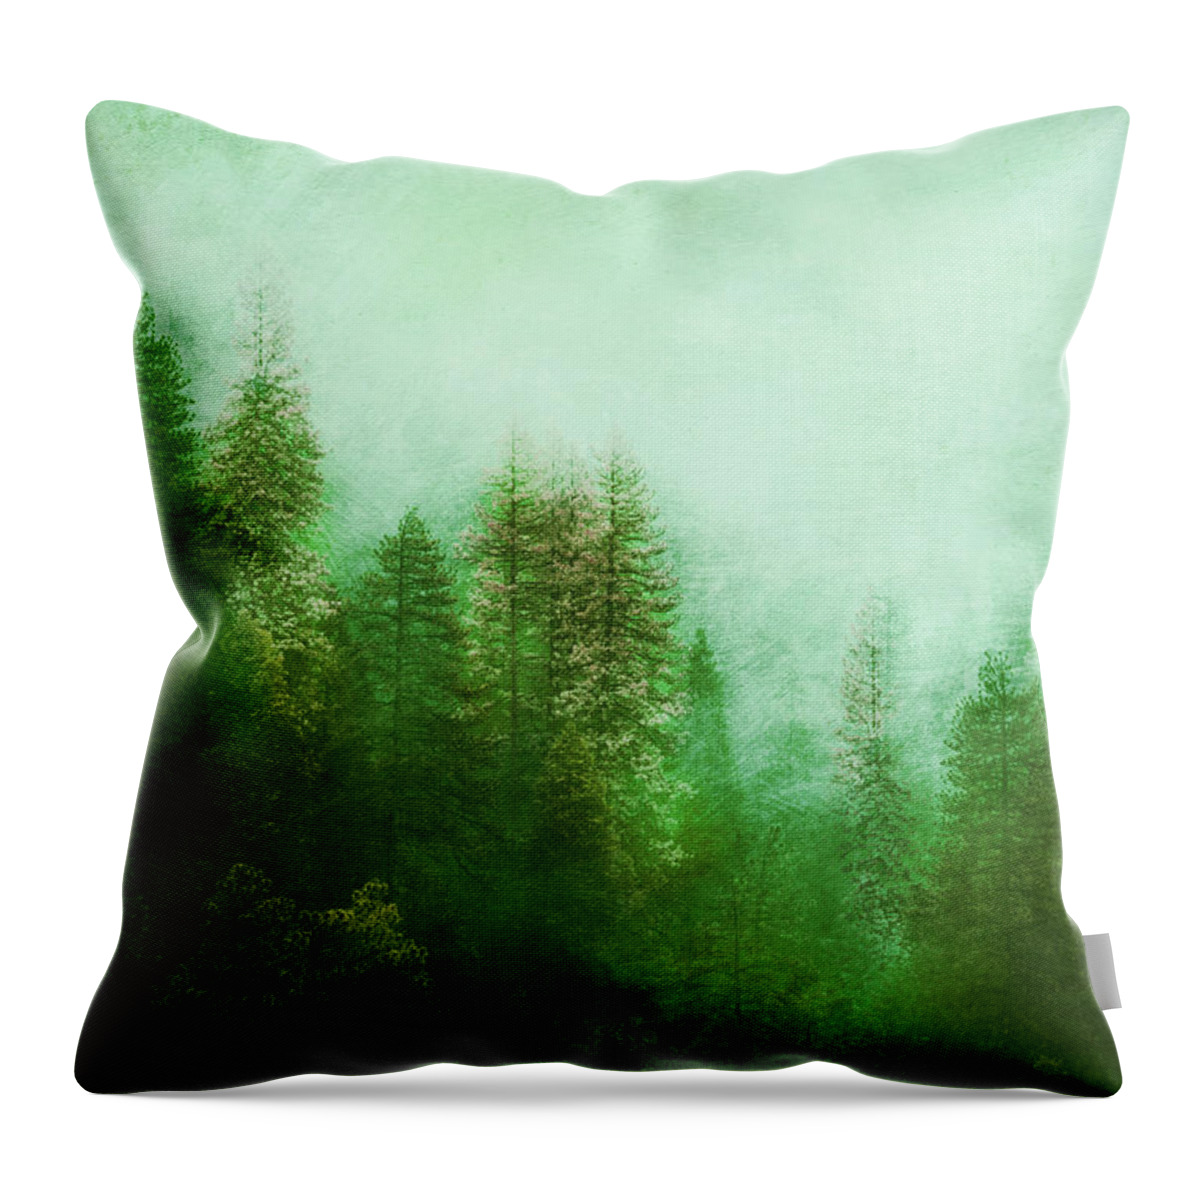 Nature Throw Pillow featuring the digital art Dreamy Spring Forest by Klara Acel